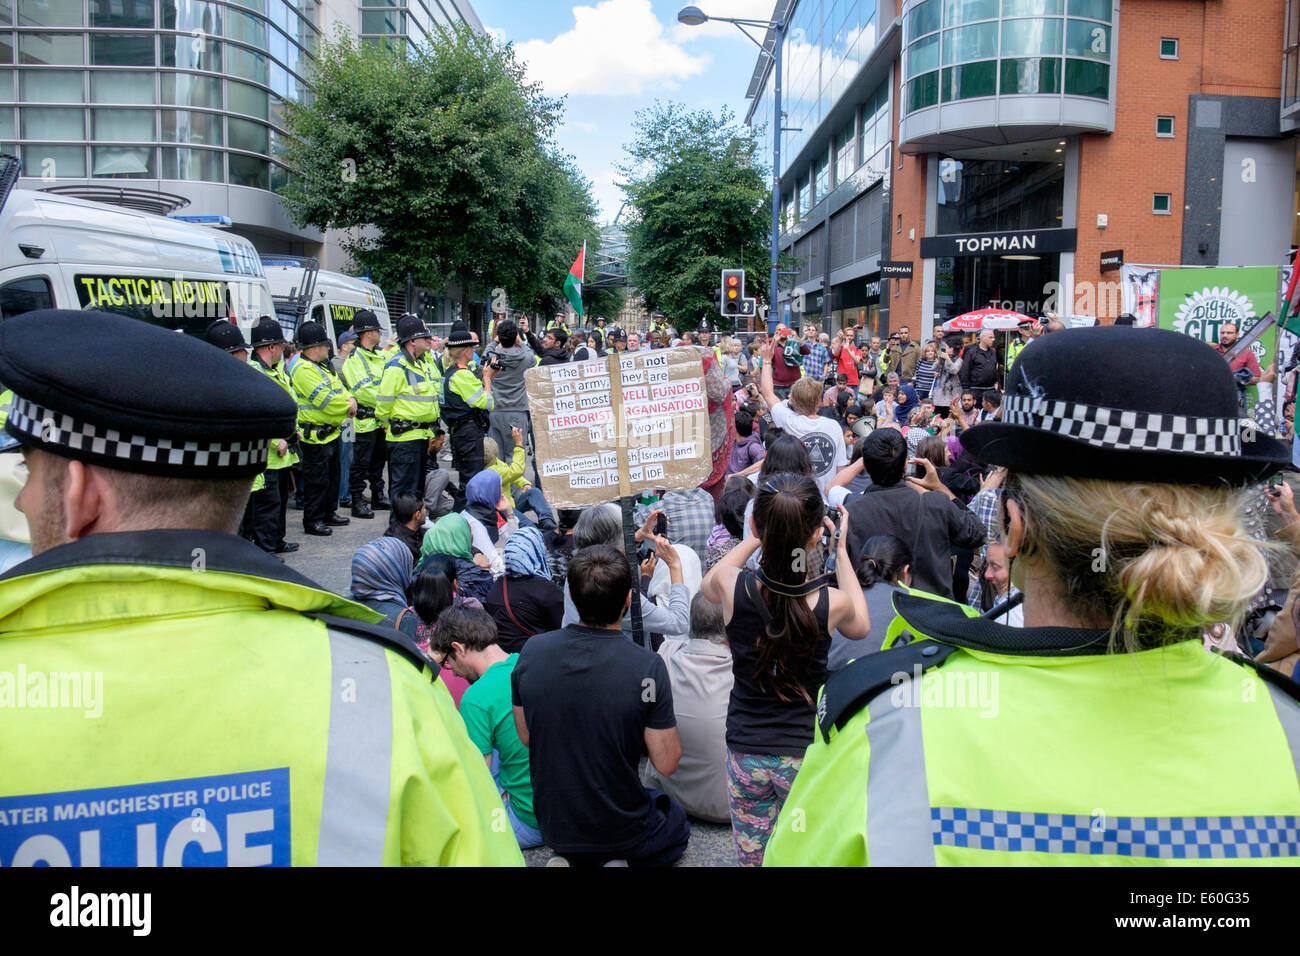 Manchester, UK. 9th August 2014. Police observe the Pro Palestinian demonstrators sitting in Market Street after marching through the shopping centre to protest against the Israeli occupation of Gaza. Credit:  Realimage/Alamy Live News Stock Photo